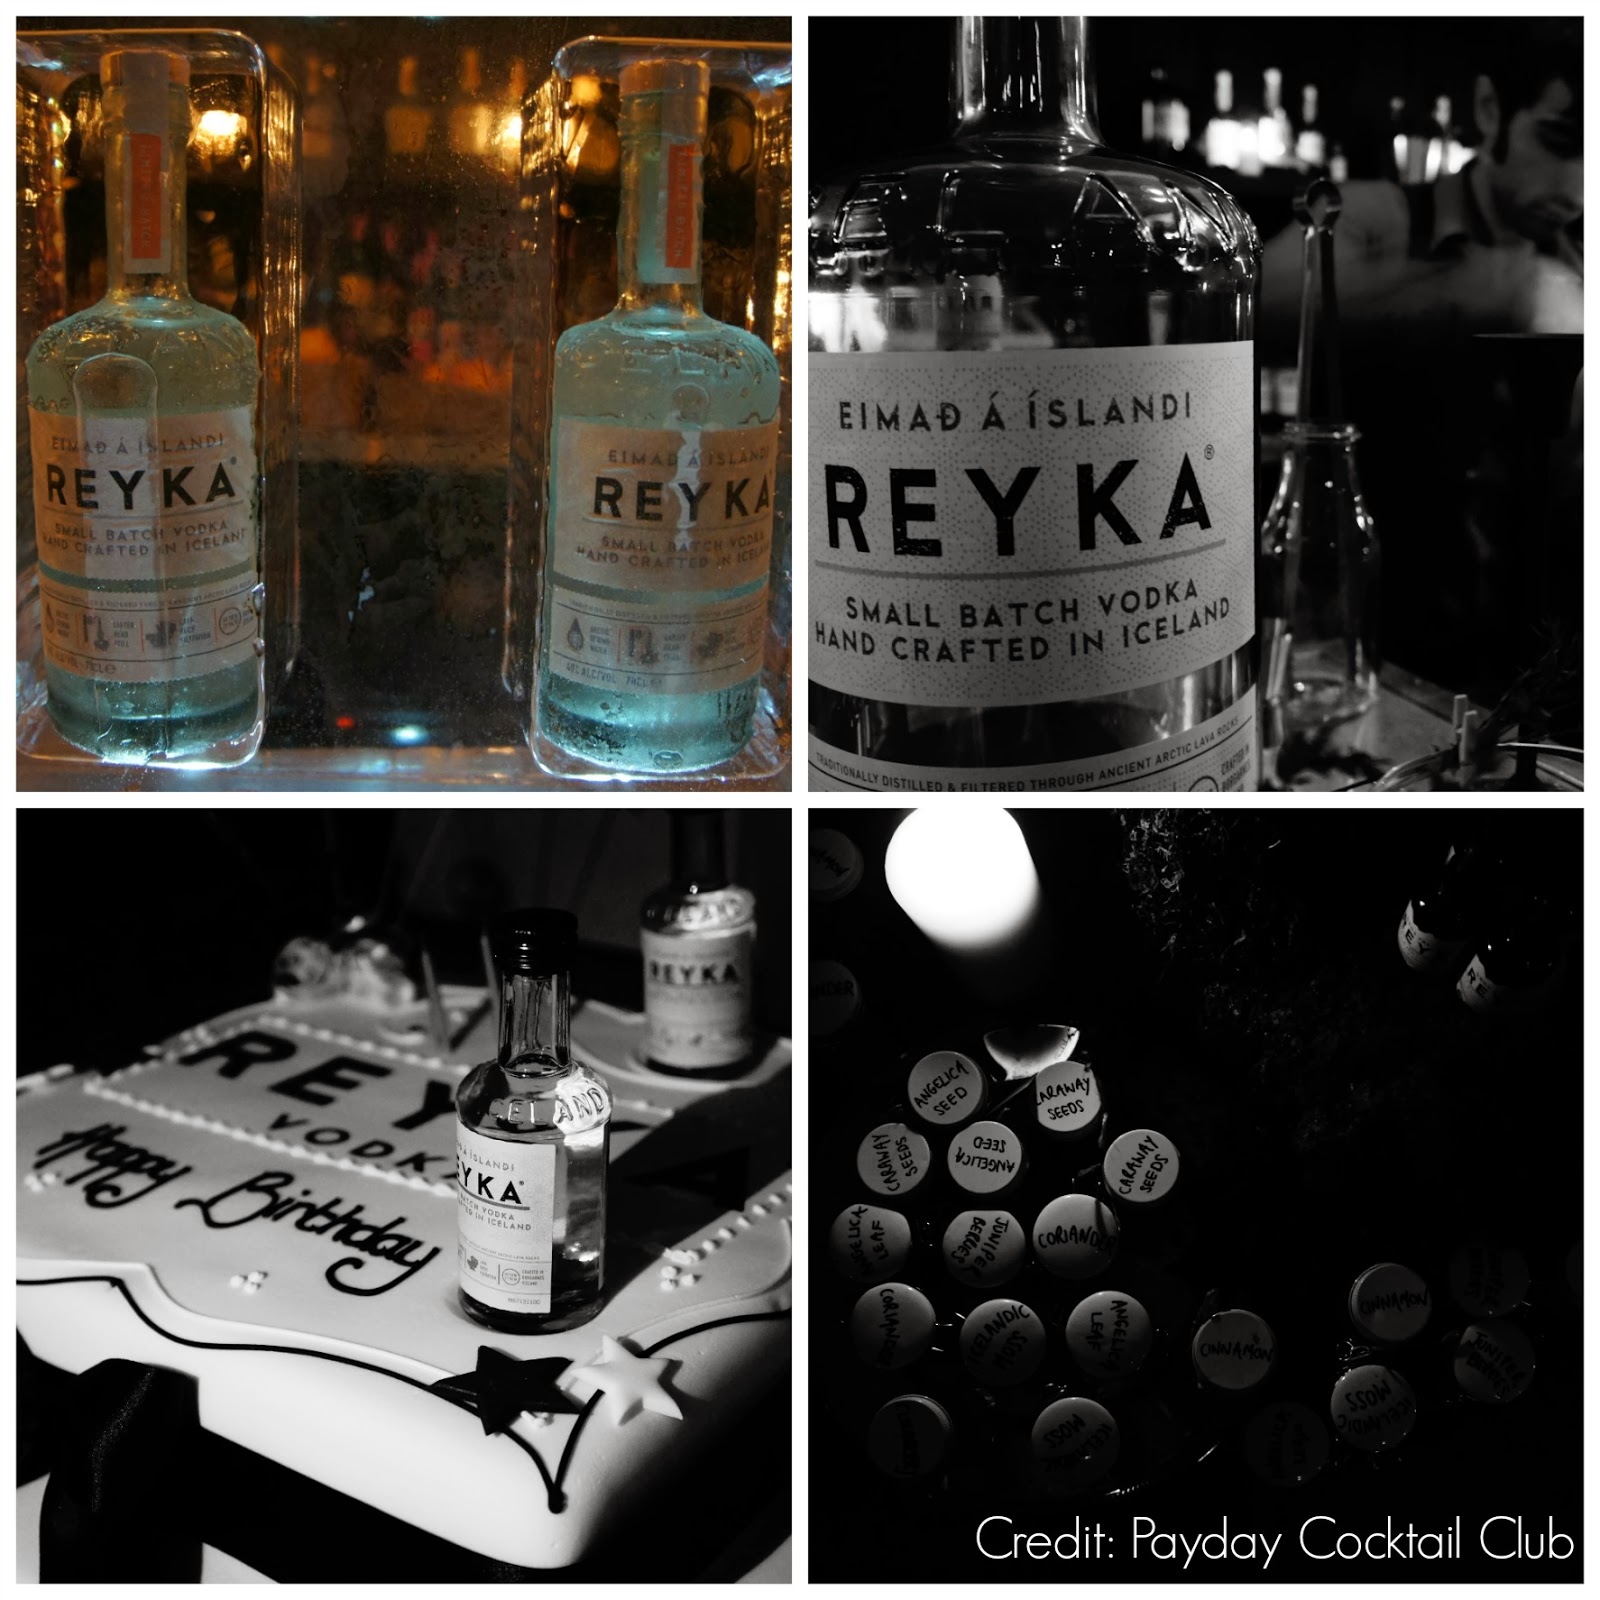 Reyka Vodka bitters launch party at Looking Glass Cocktail Club 